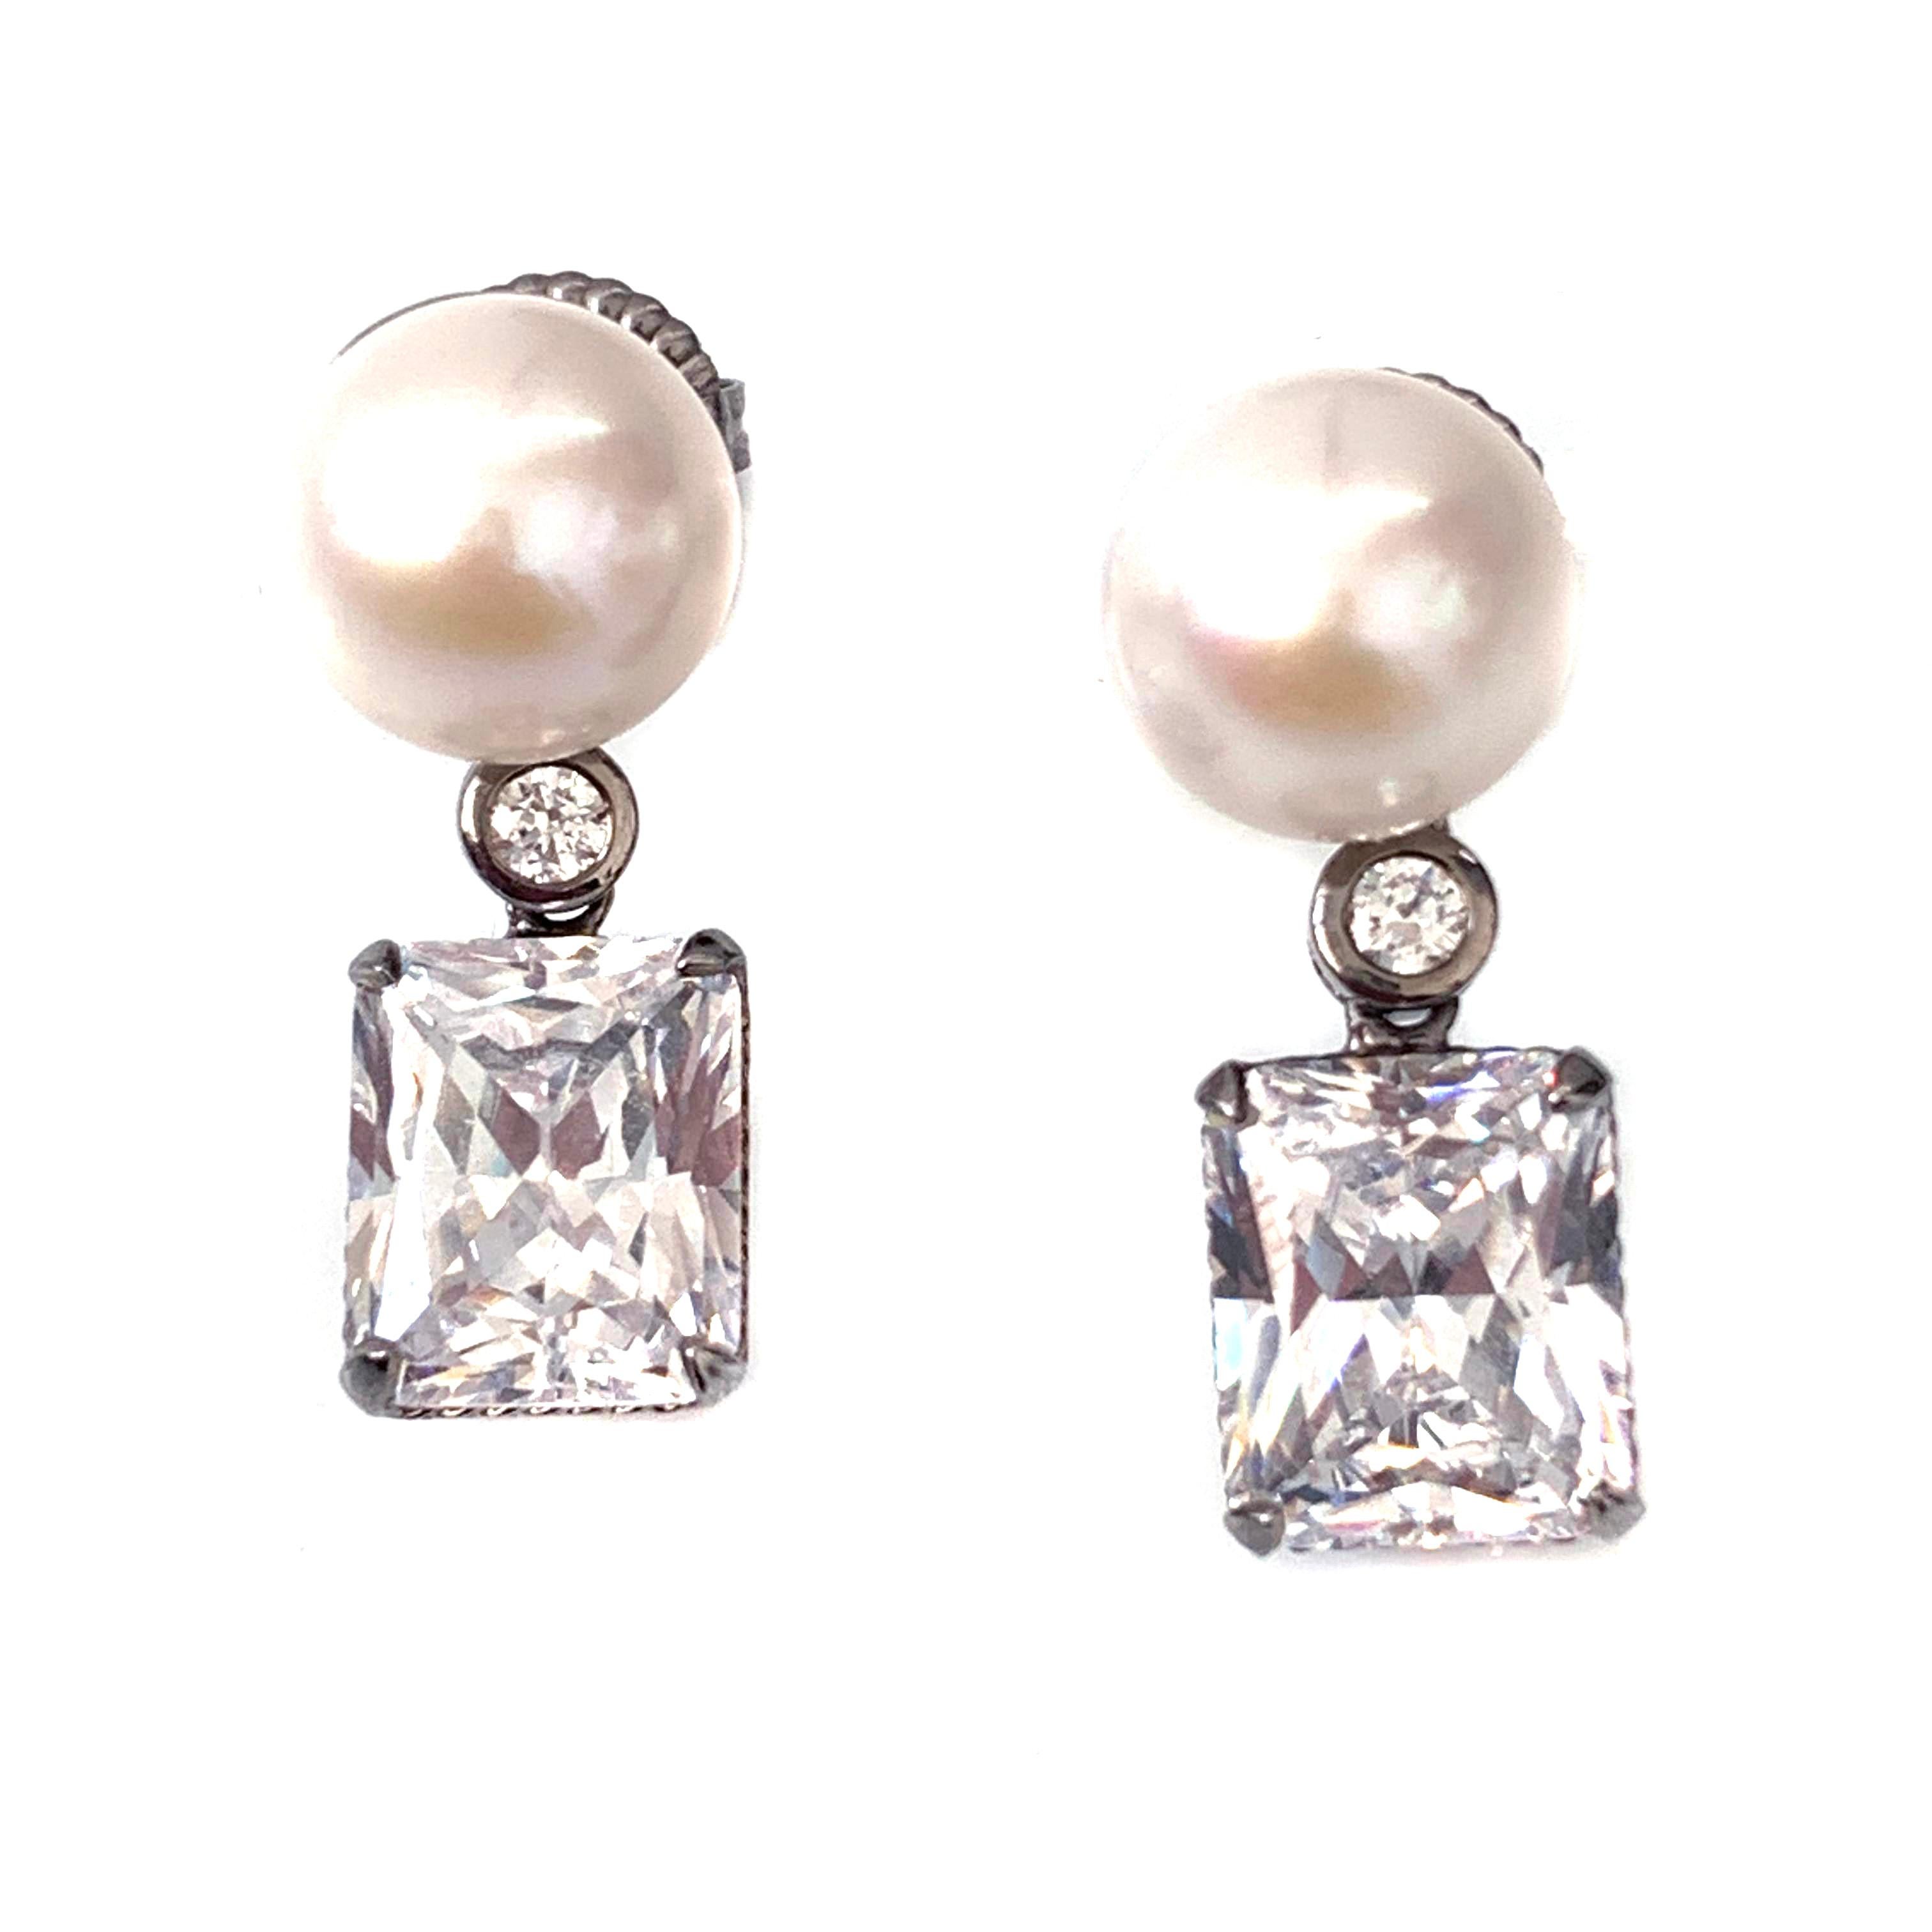 Contemporary 11mm Cultured Pearl and 4ct Simulated Diamond Drop Earrings